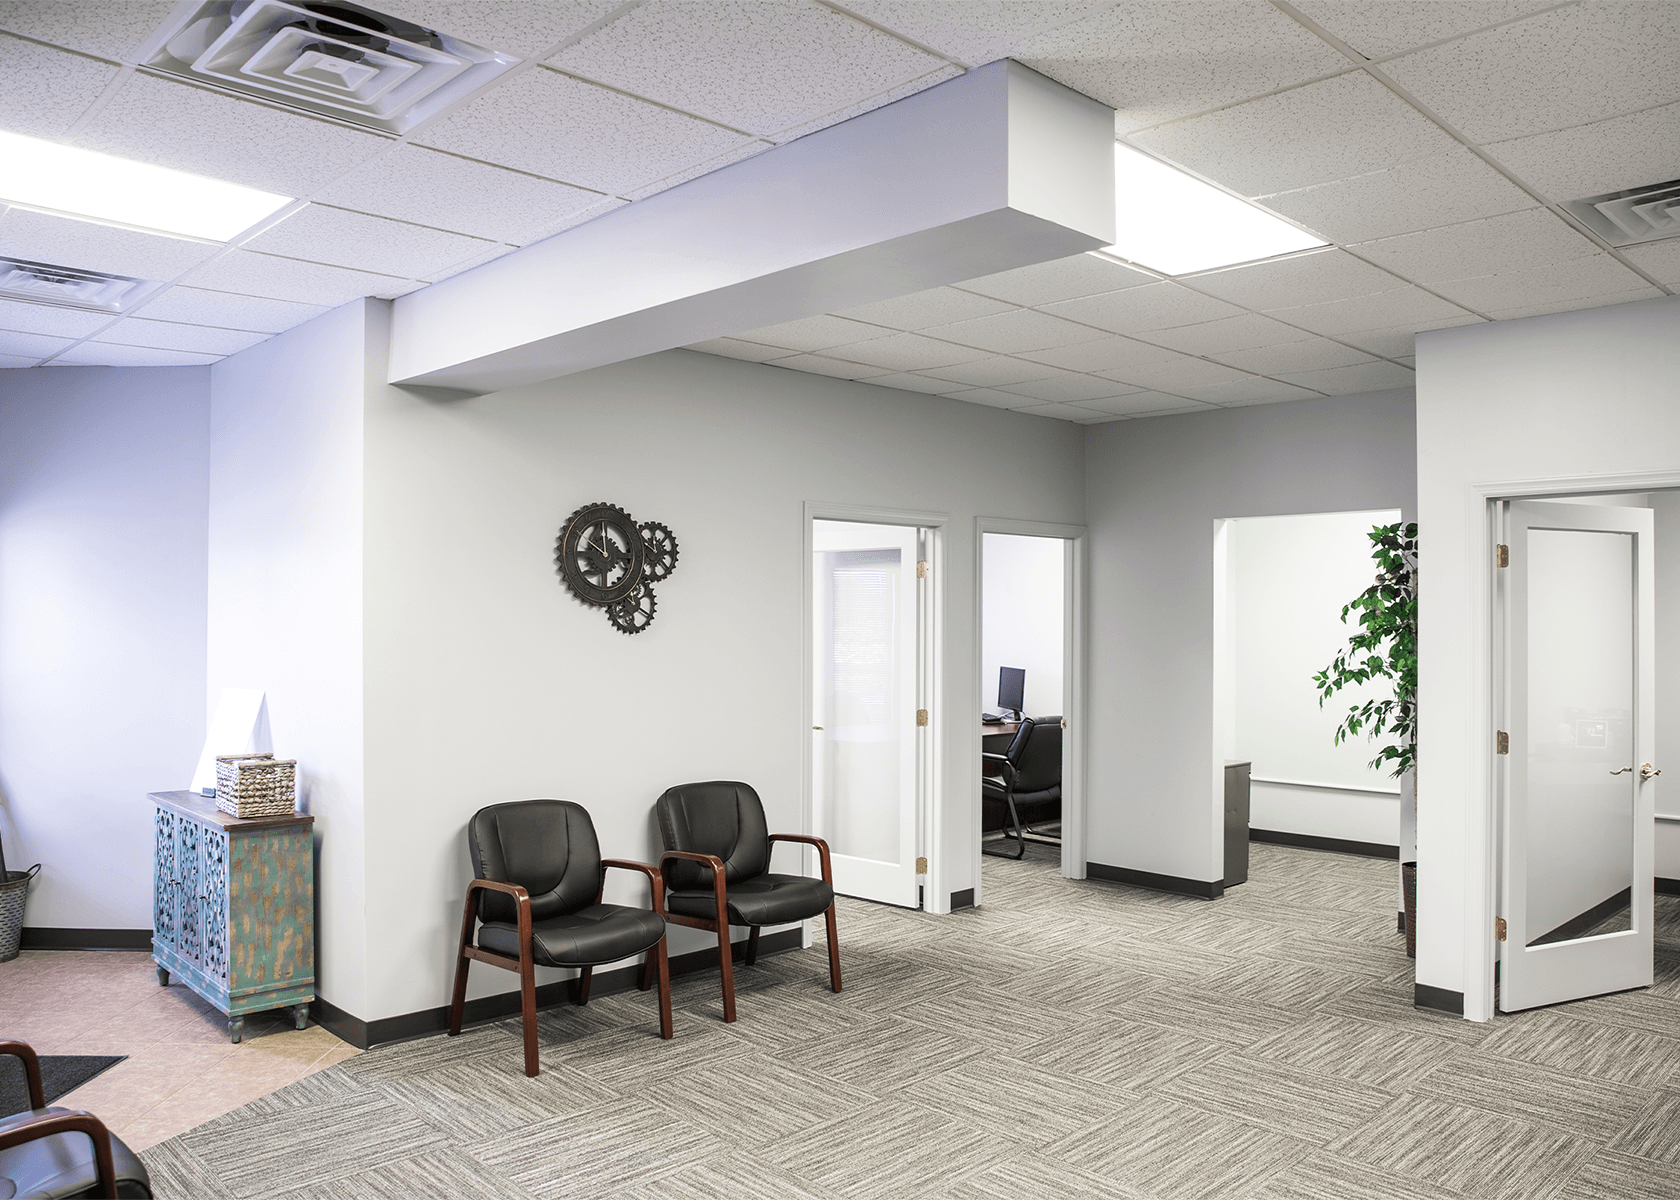 Office suite with bright white walls, light gray carpet, and waiting chairs